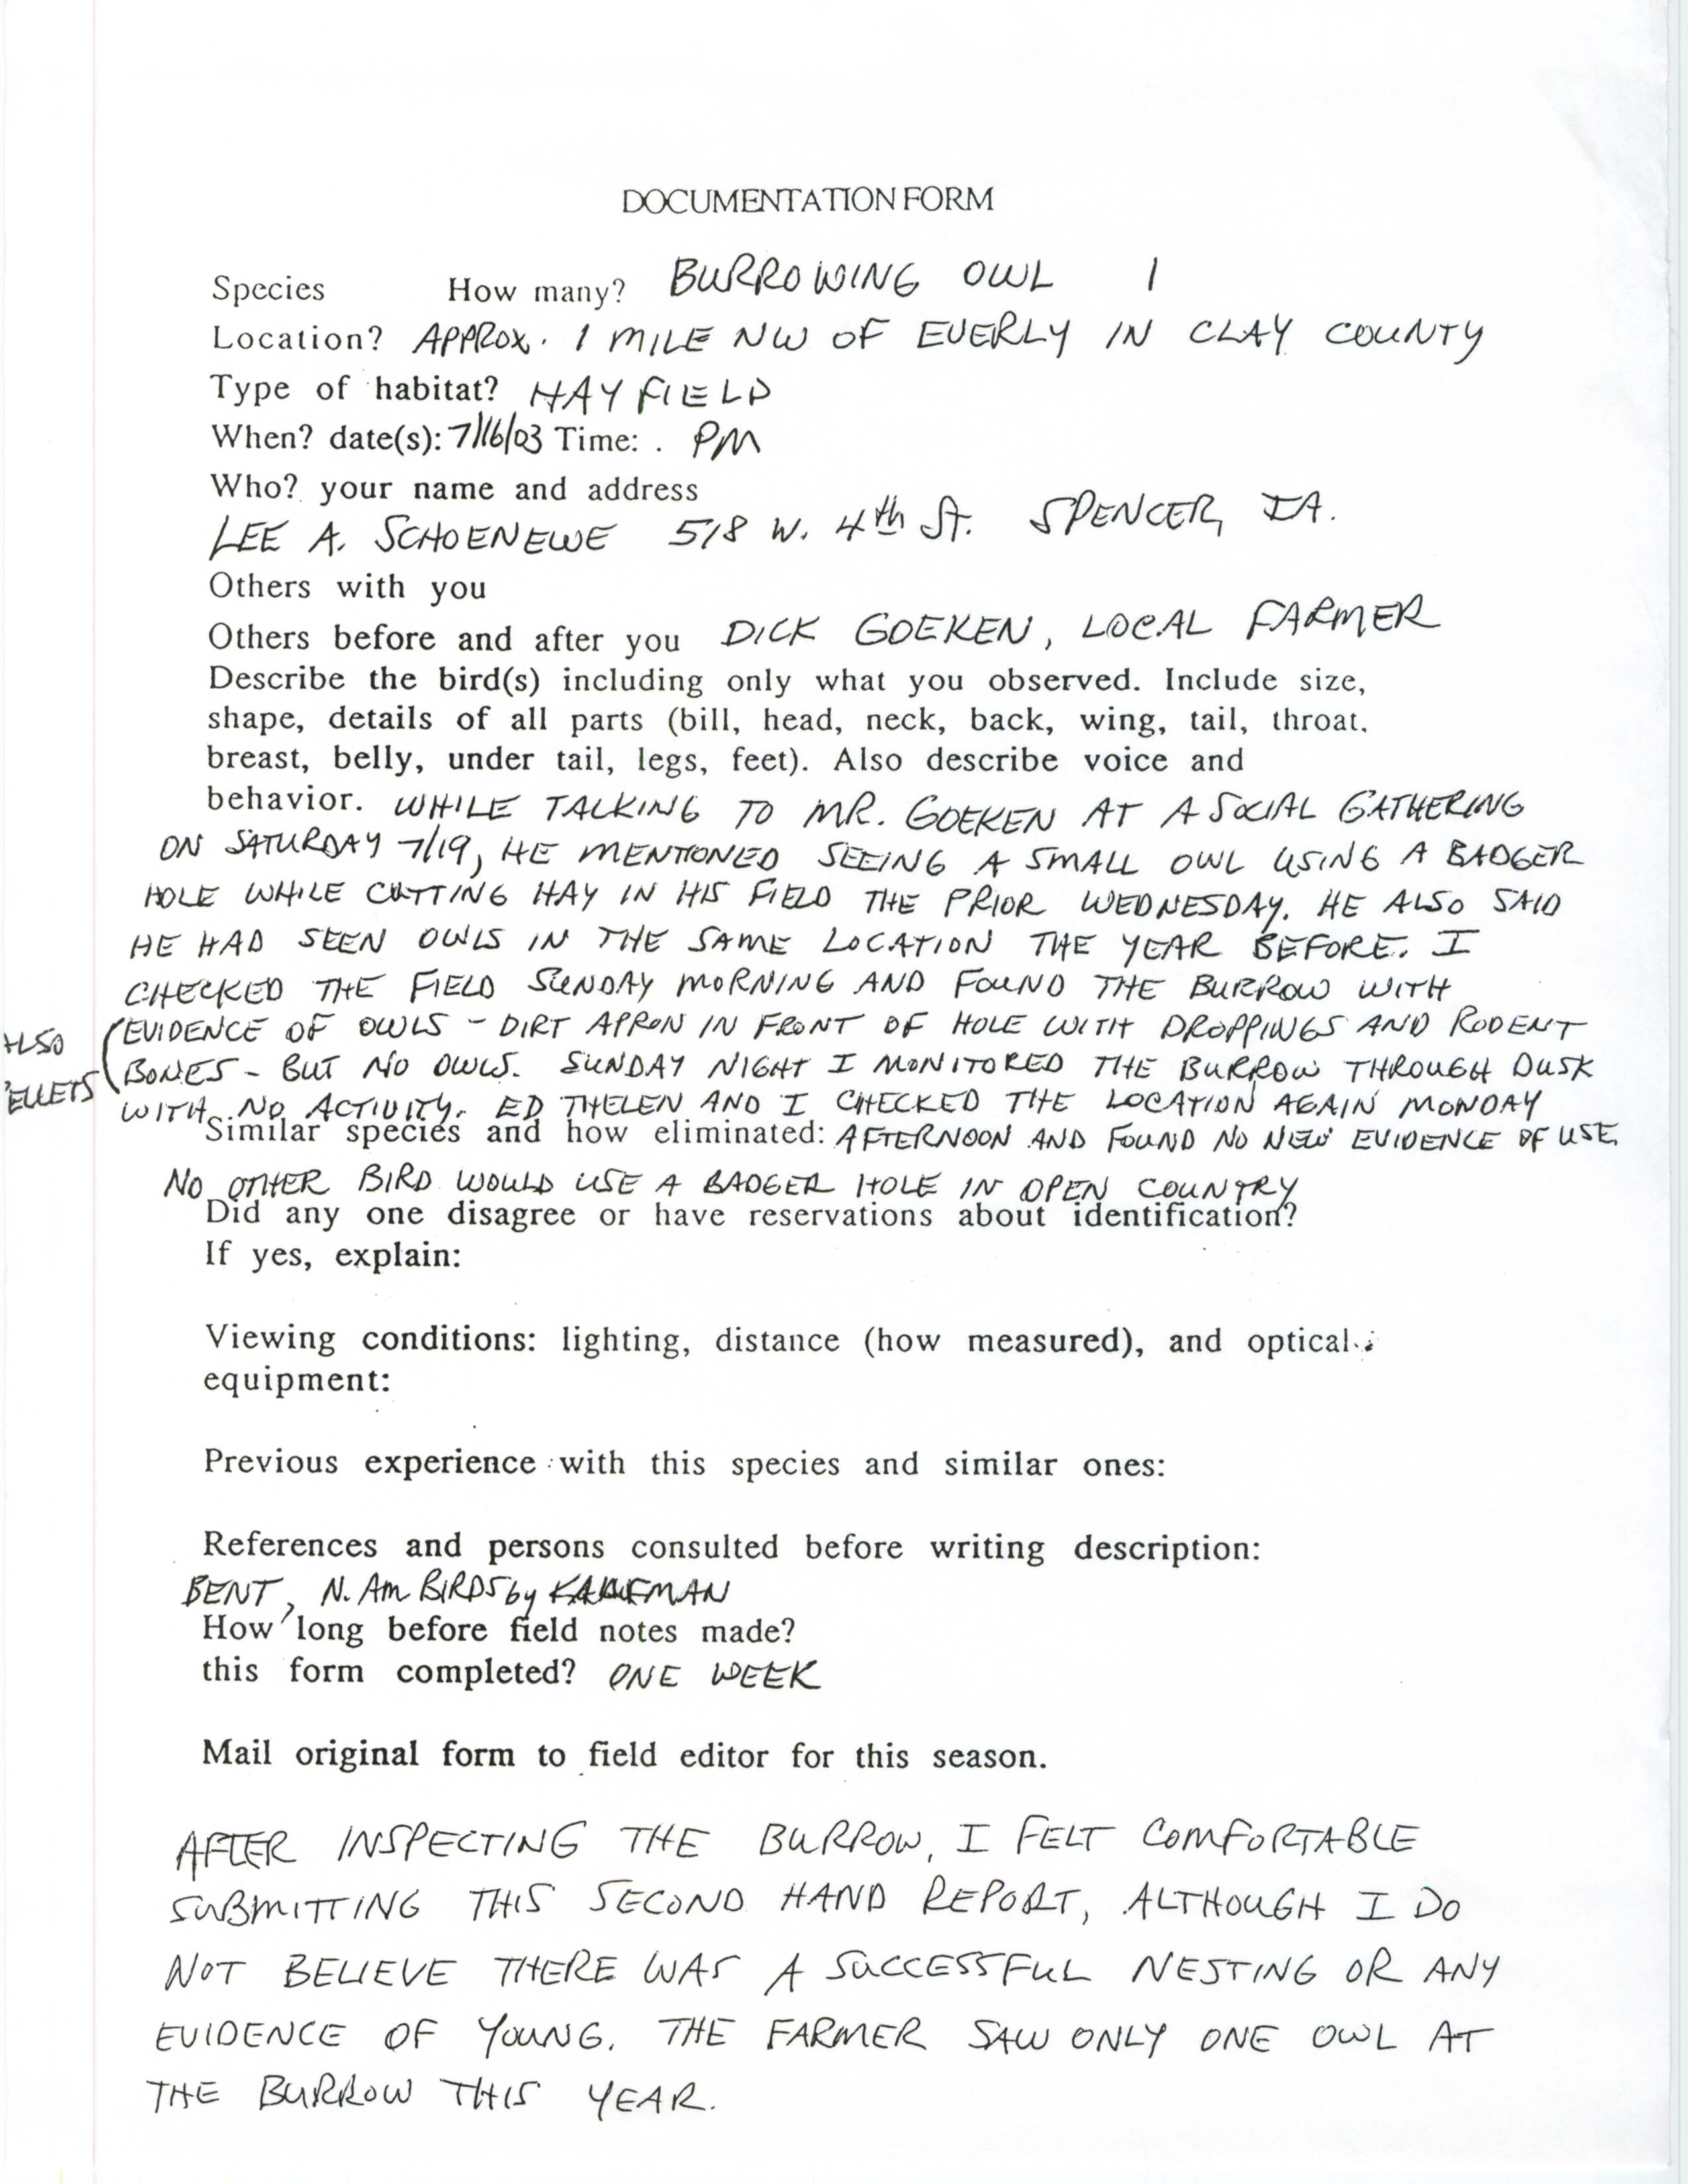 Verifying documentation form for a Burrowing Owl sighting submittted by Lee A. Schoenewe, July 16, 2003